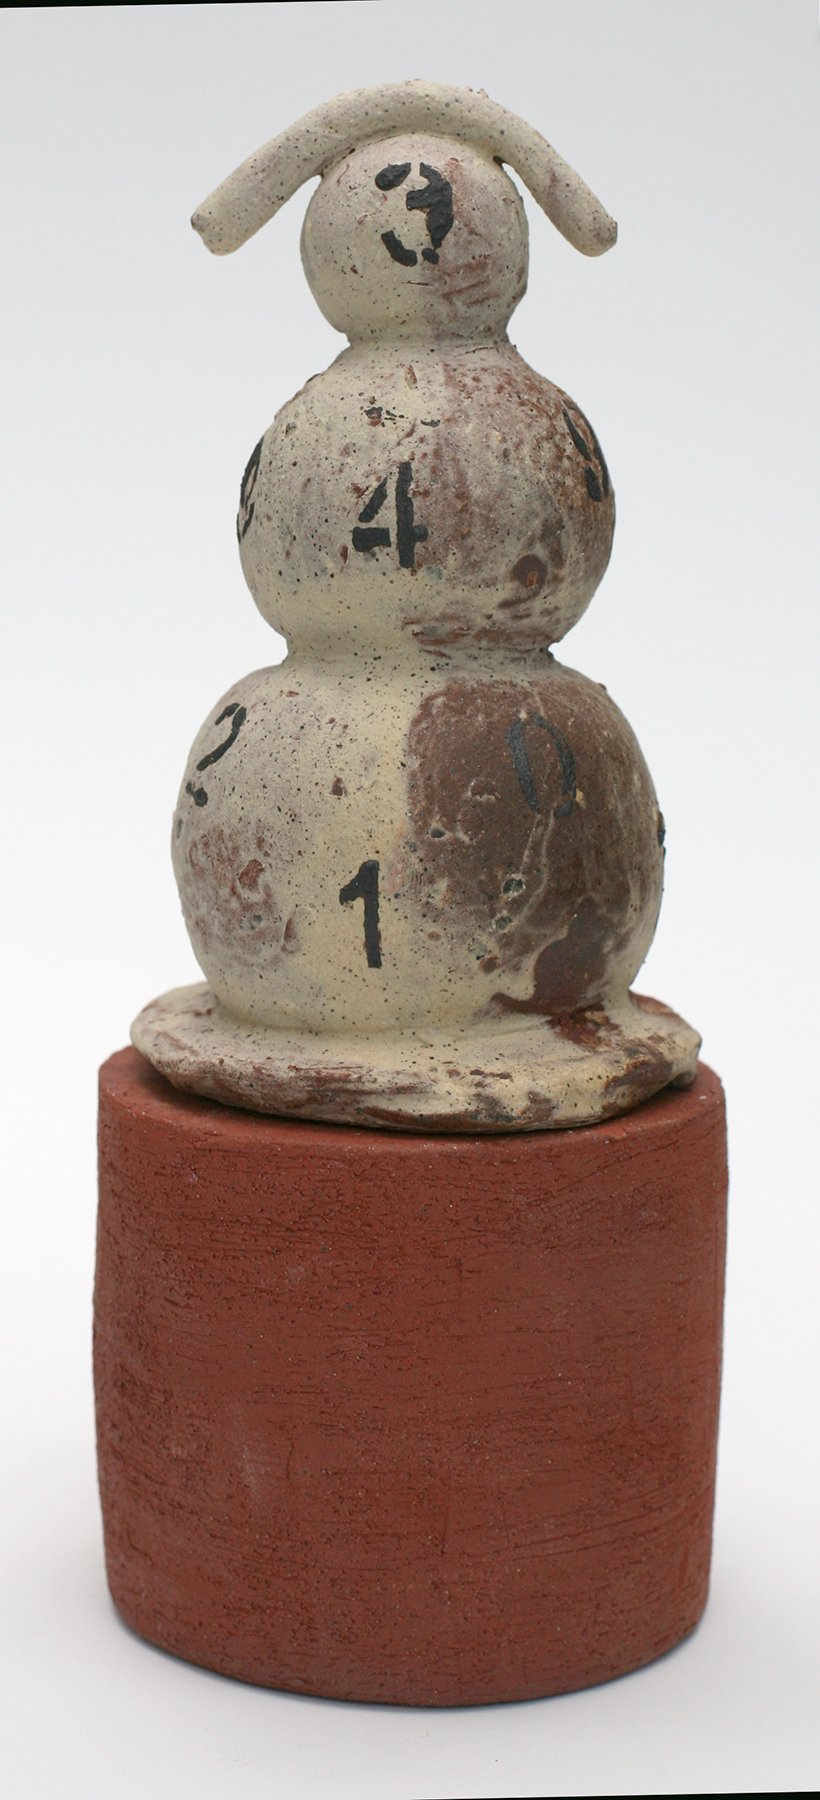 Snowman 03 (private collection)